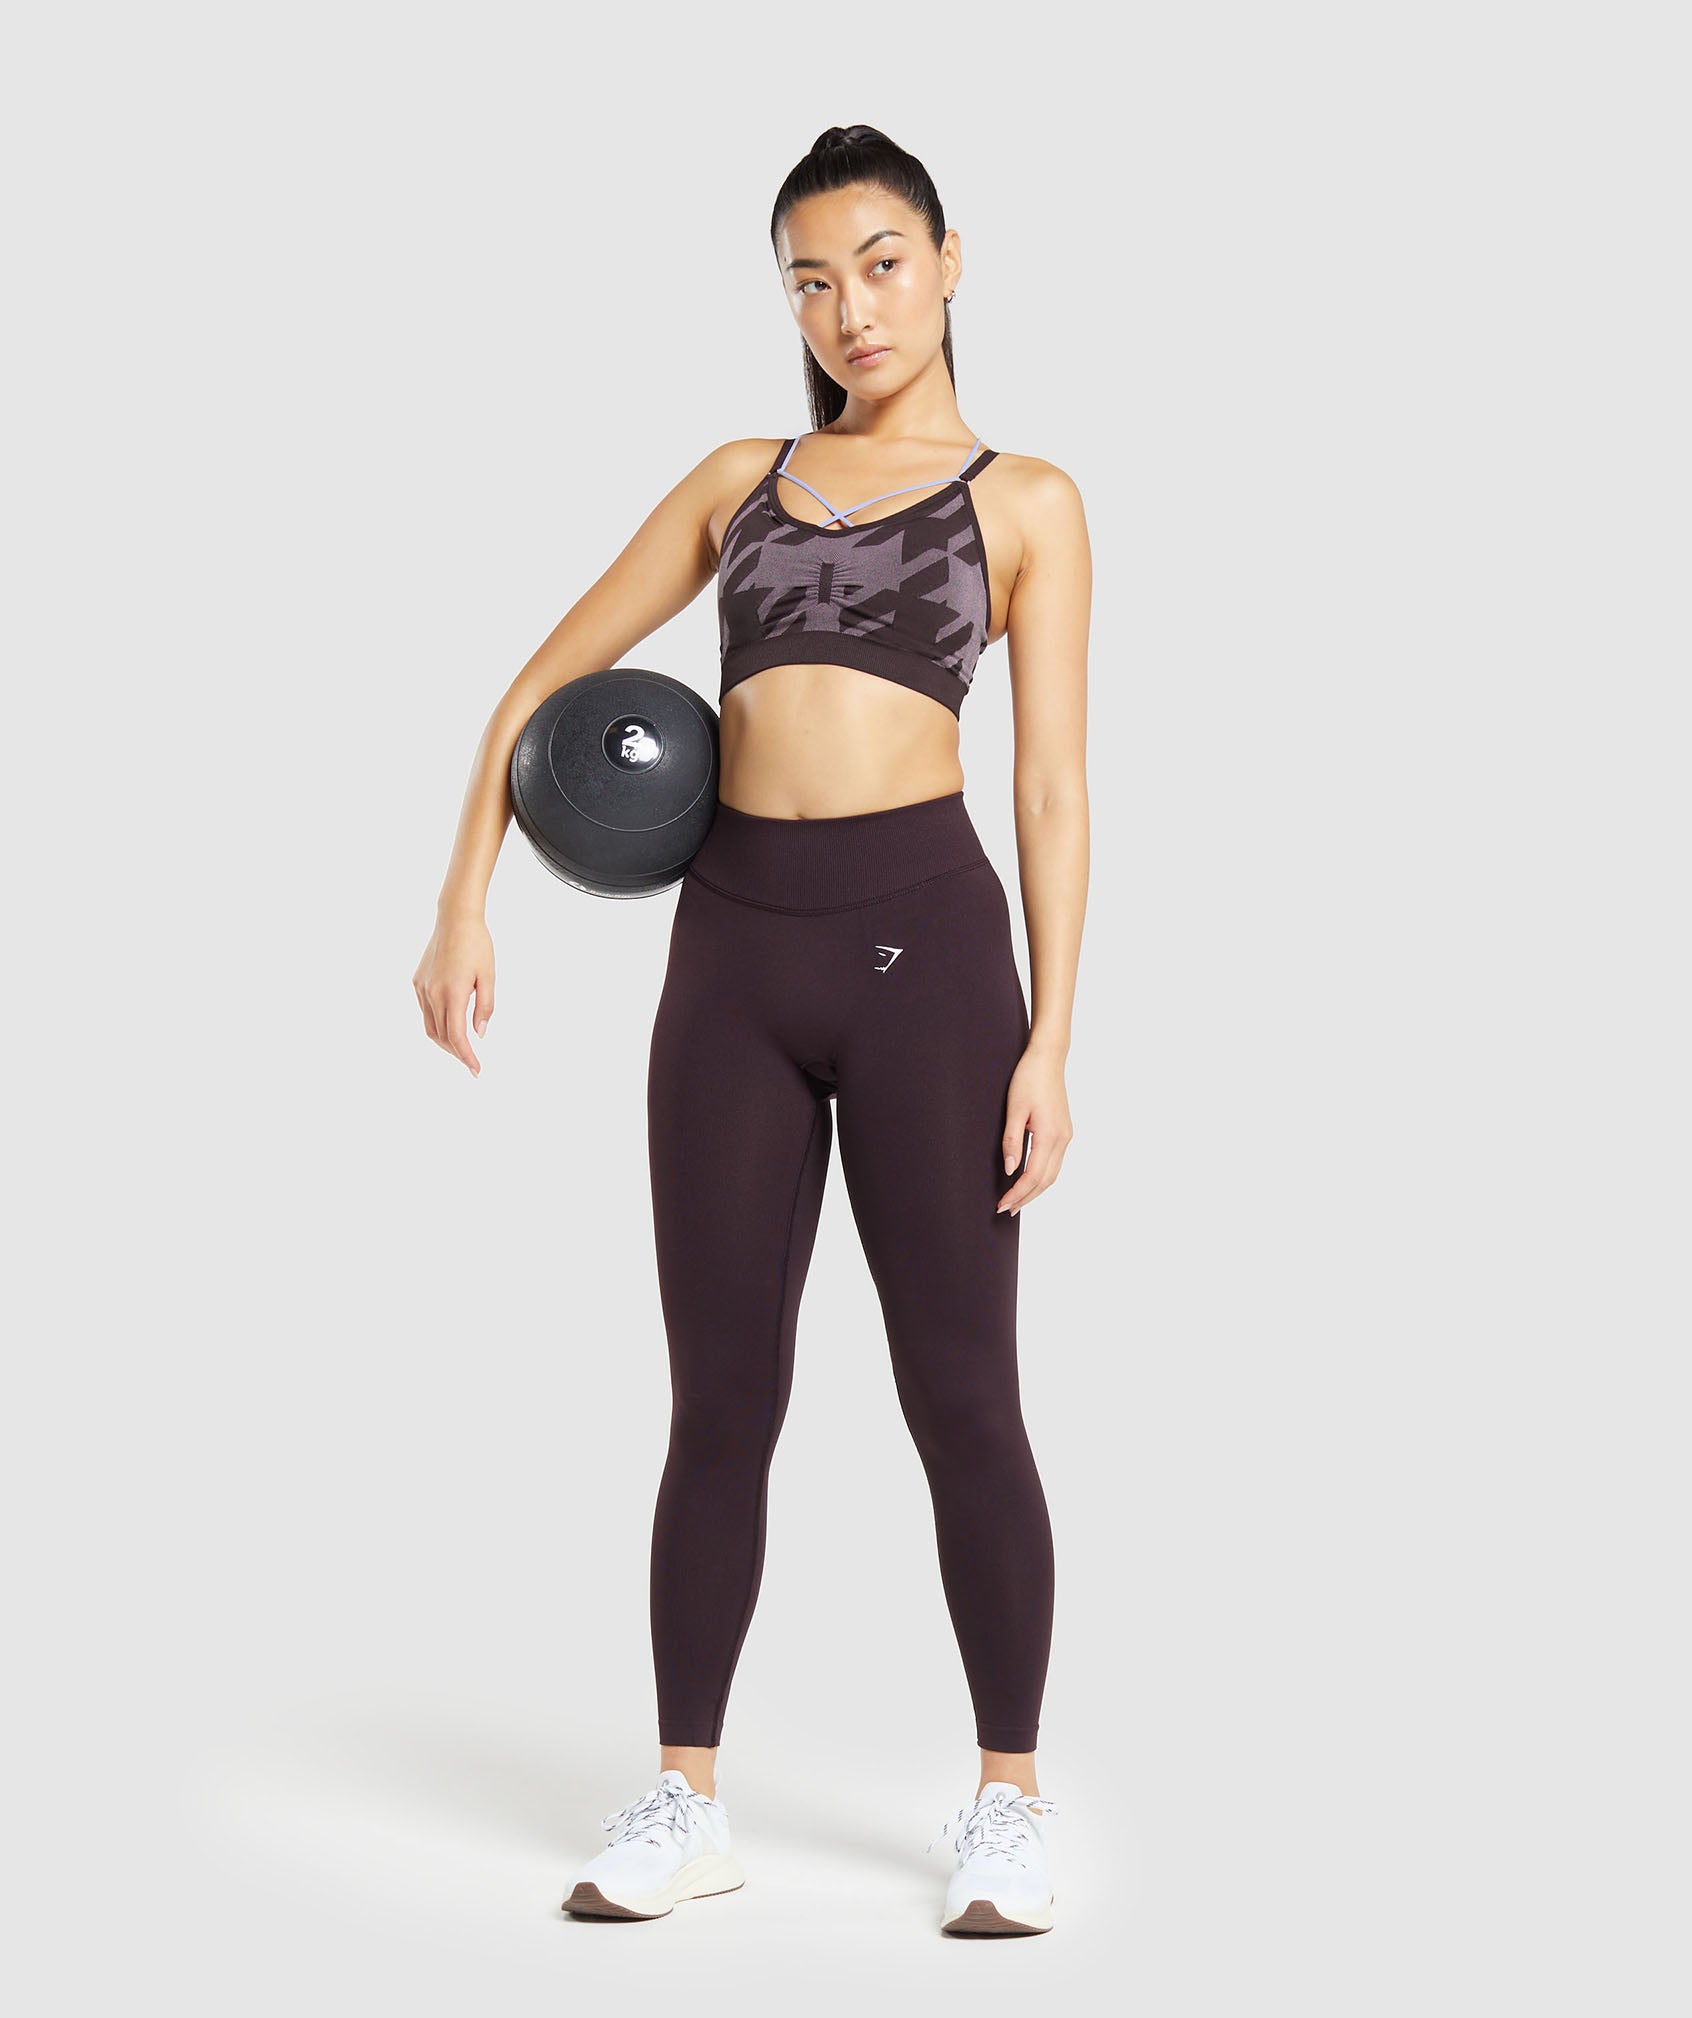 Apex Limit Seamless Ruched Sports Bra in Plum Brown/Powder Lilac - view 4